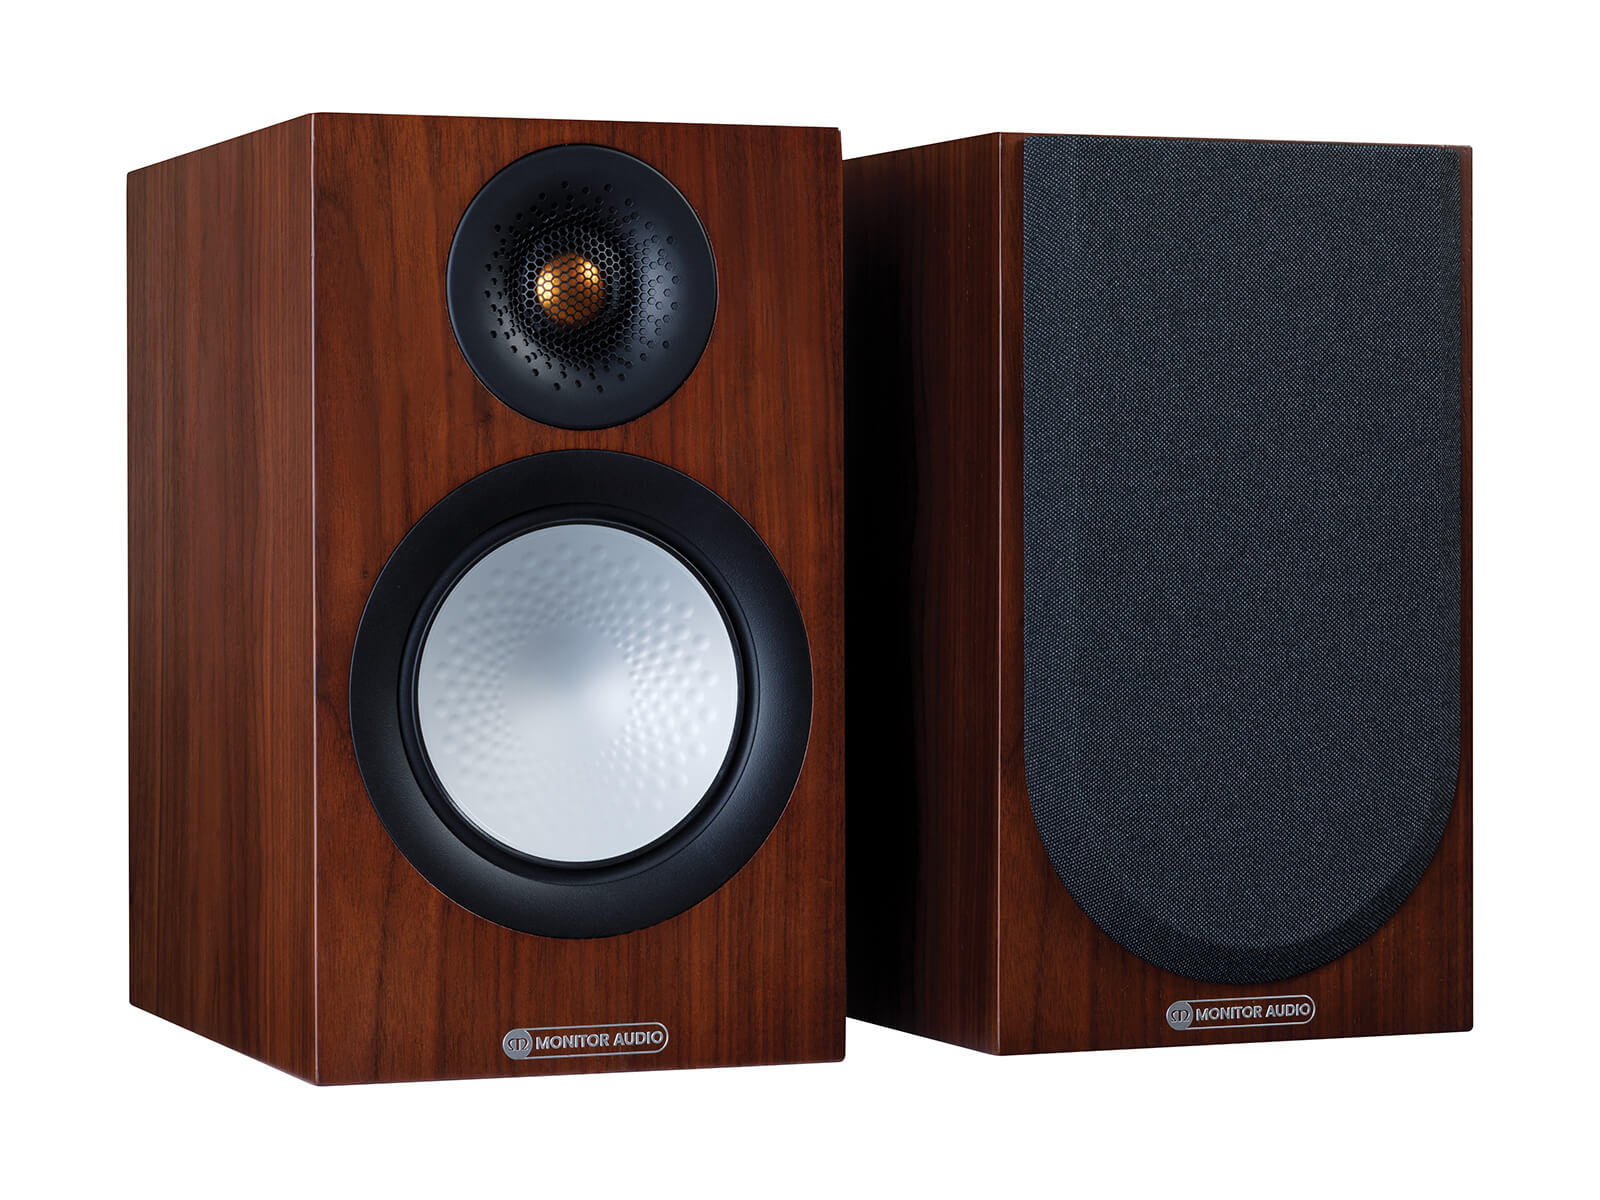 A pair of Monitor Audio's Silver 50 7G, in a natural walnut finish, iso view, with and without grilles.